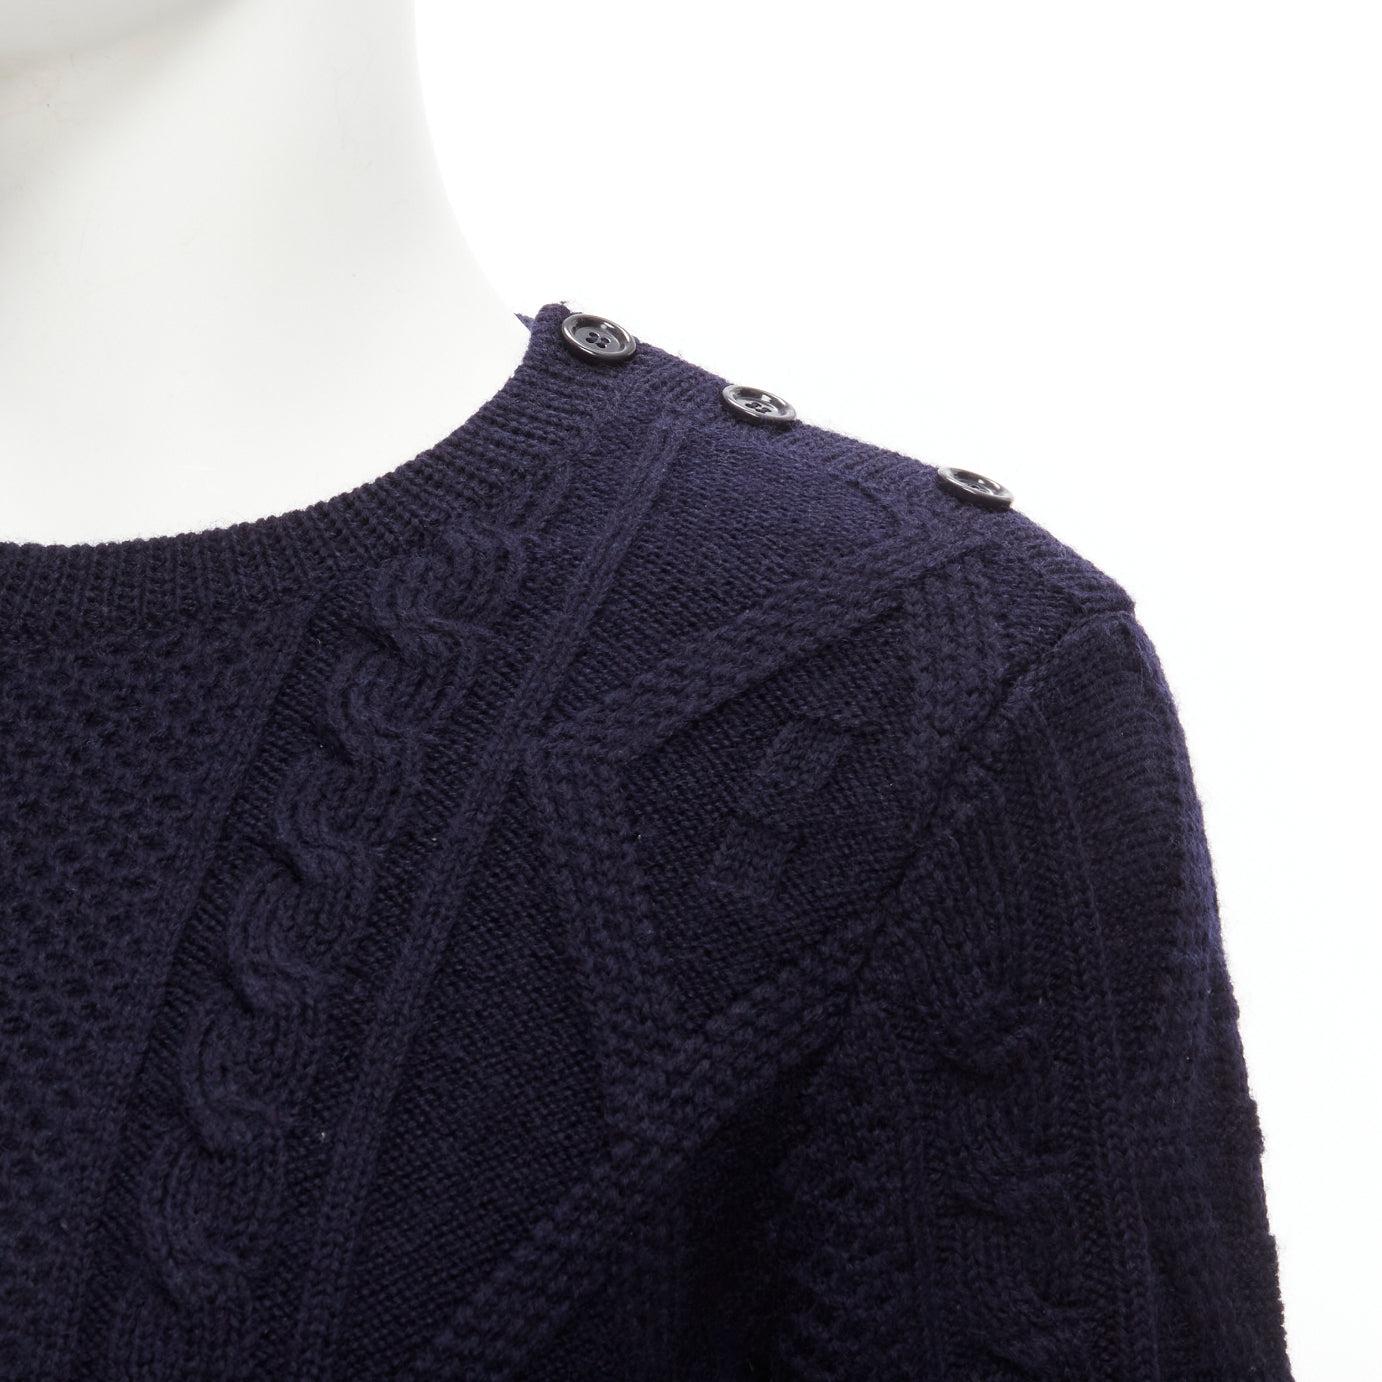 APC 100% wool navy blue fisherman cable knit crew neck long sleeve sweater S
Reference: JSLE/A00042
Brand: APC
Material: Wool
Color: Navy
Pattern: Solid
Closure: Pullover
Extra Details: Cable knit back and front.
Made in: